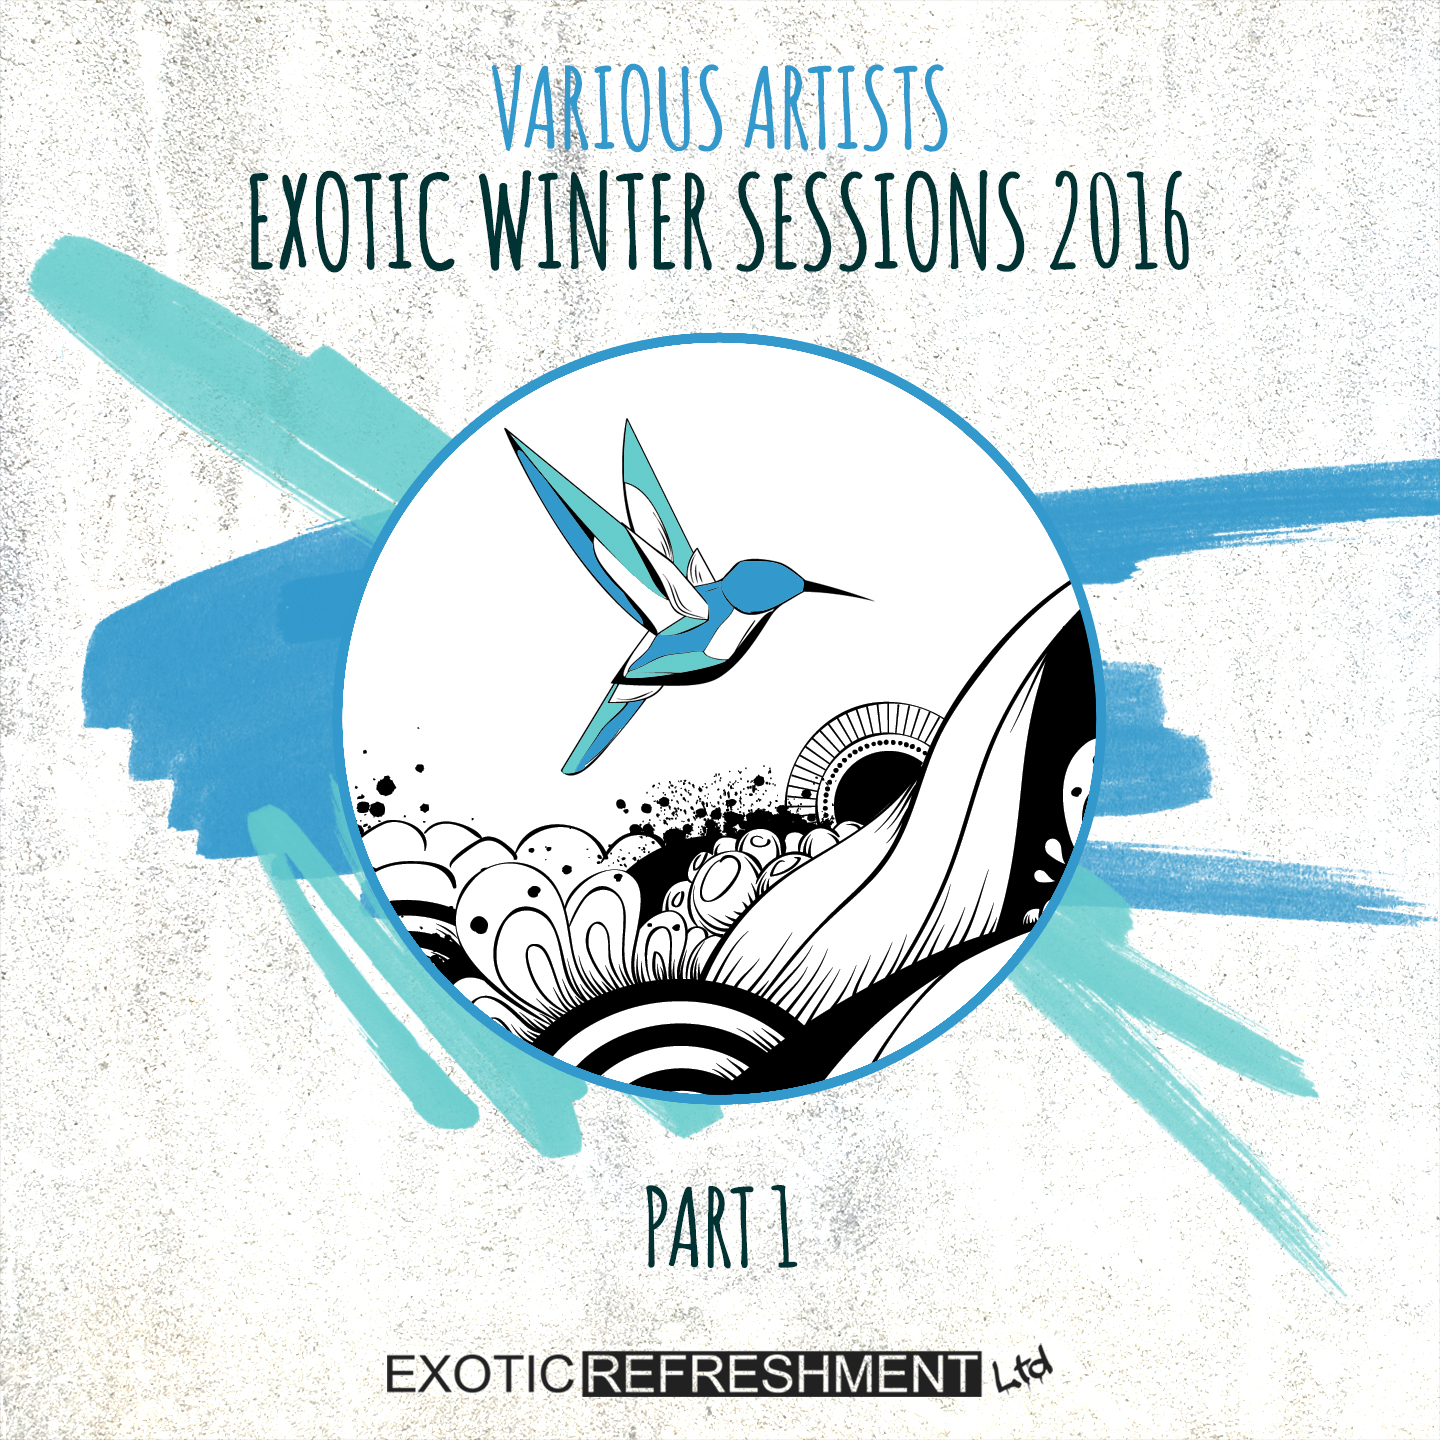 Exotic Winter Sessions 2016 - Part 1